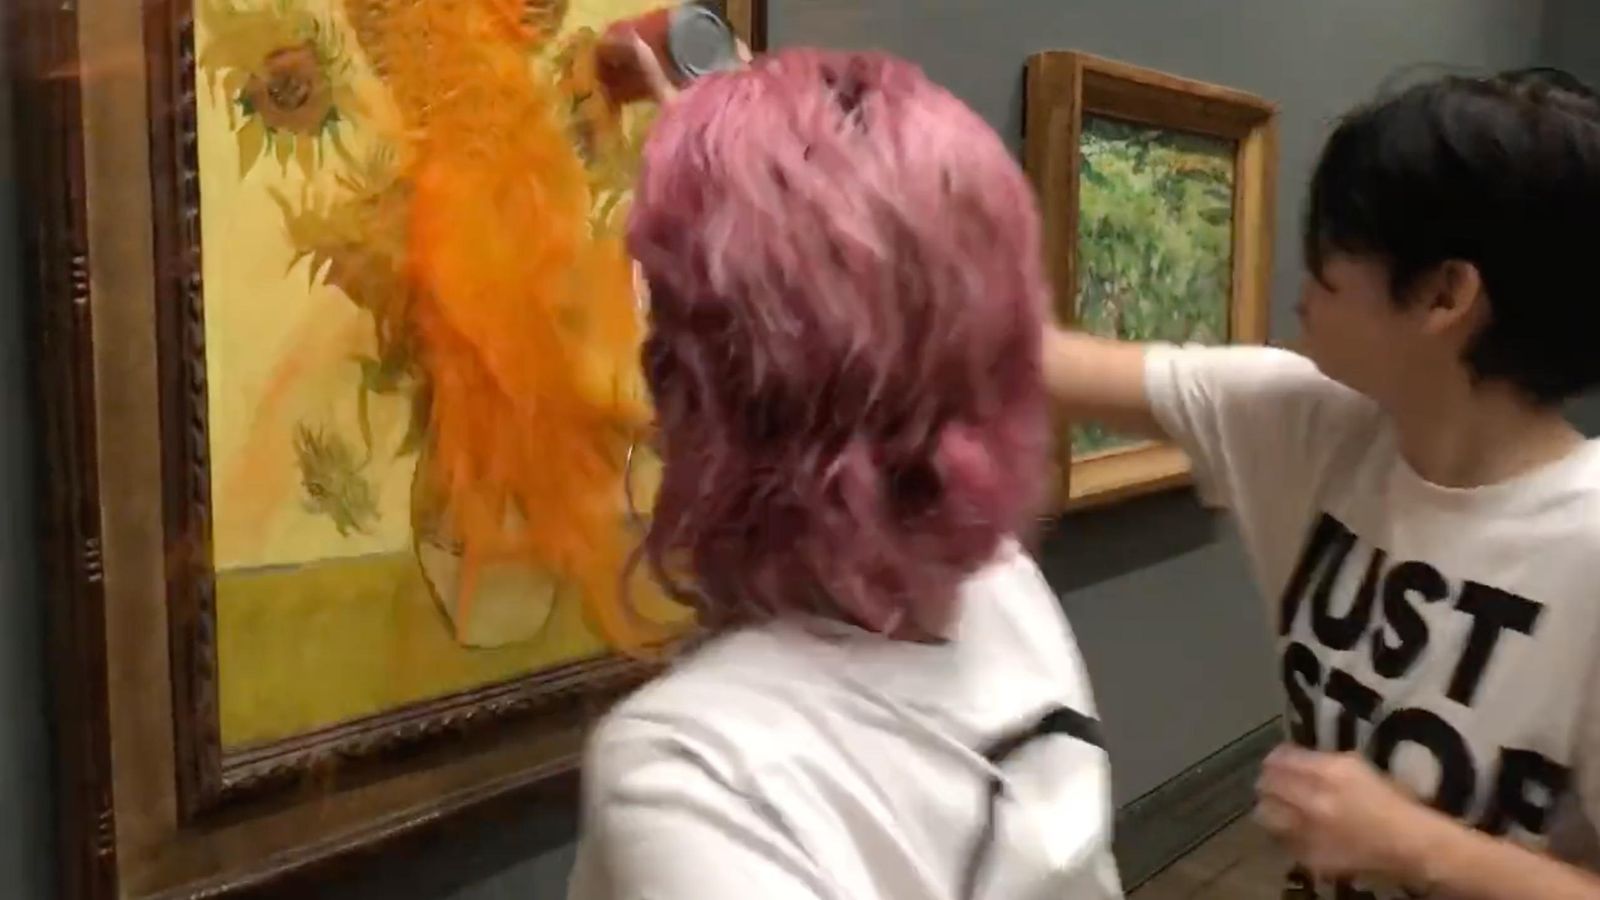 Two women charged after soup thrown over Van Gogh's Sunflowers painting